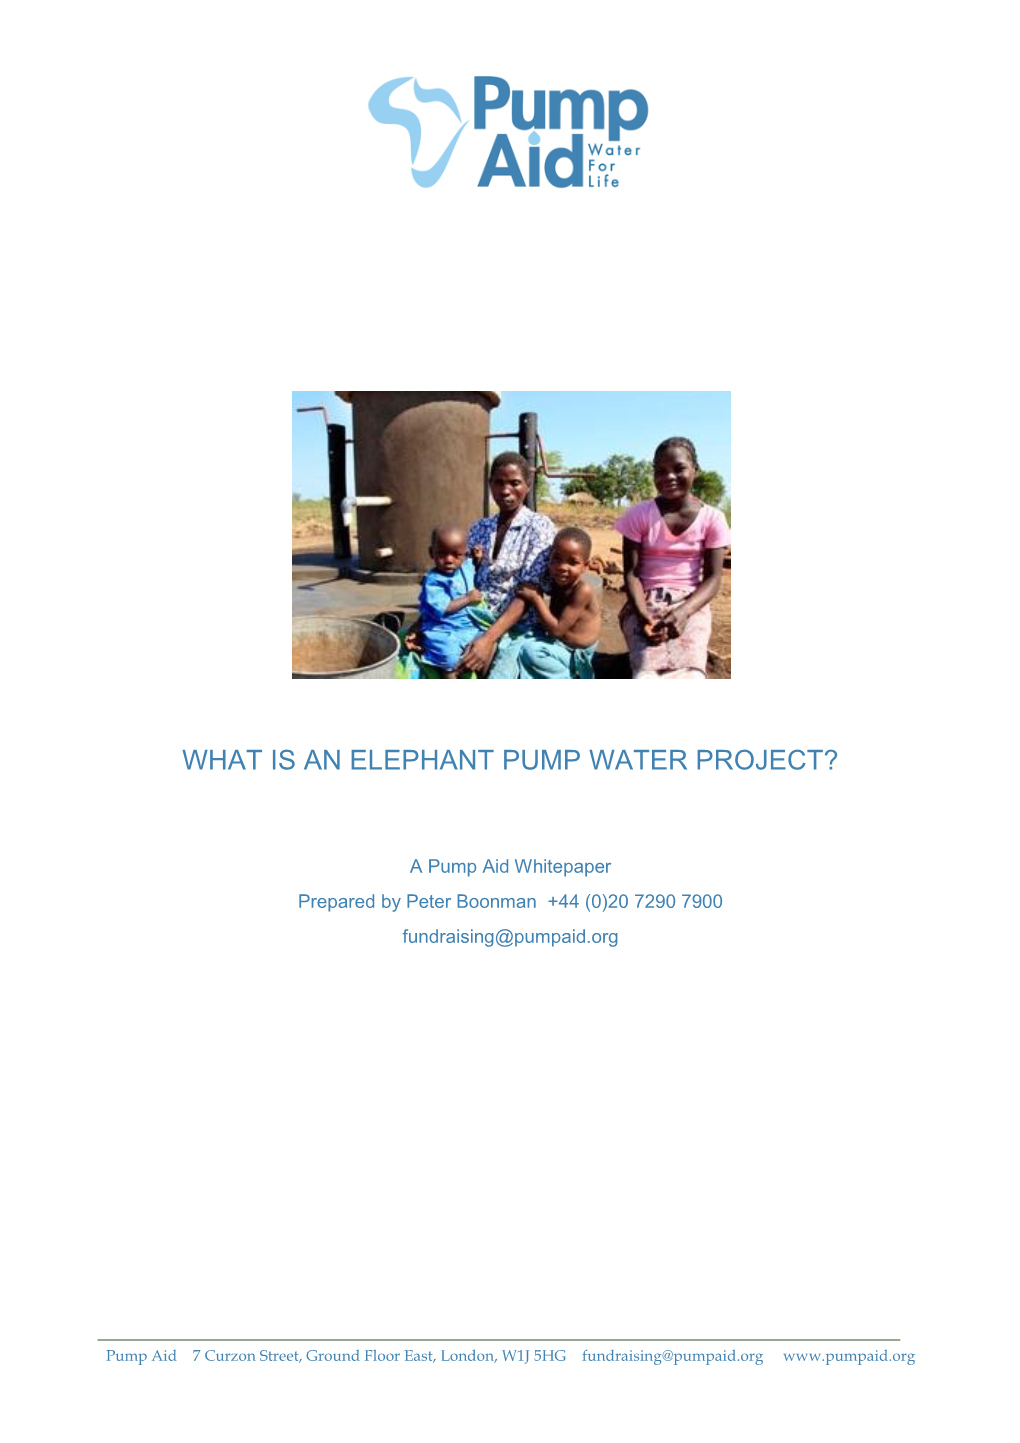 What Is an Elephant Pump Water Project?